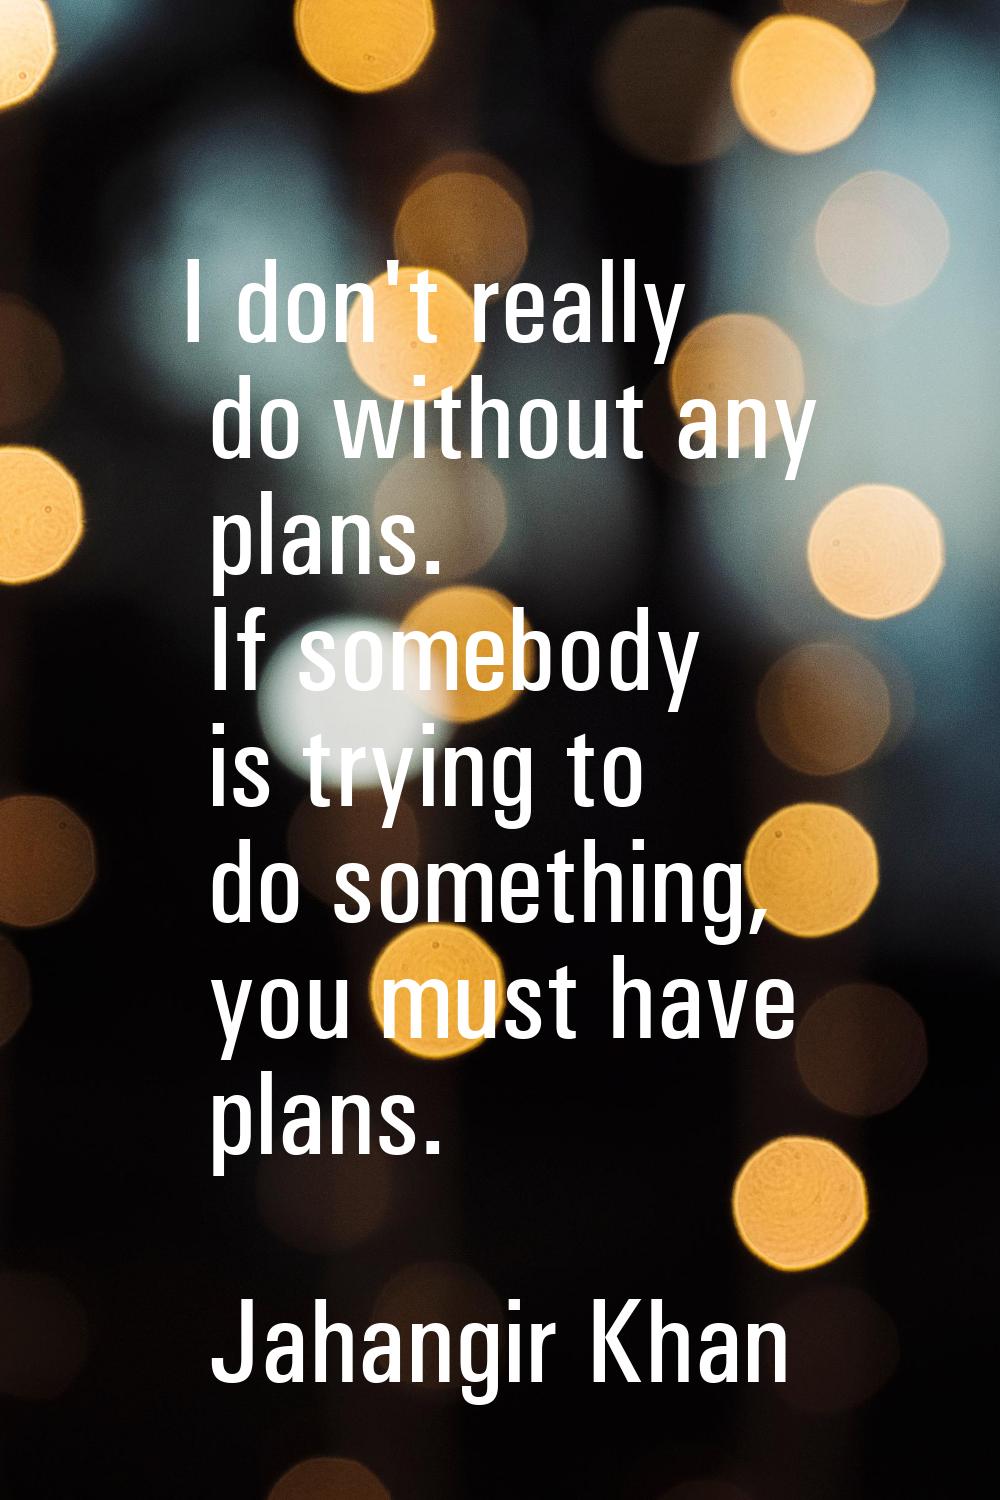 I don't really do without any plans. If somebody is trying to do something, you must have plans.